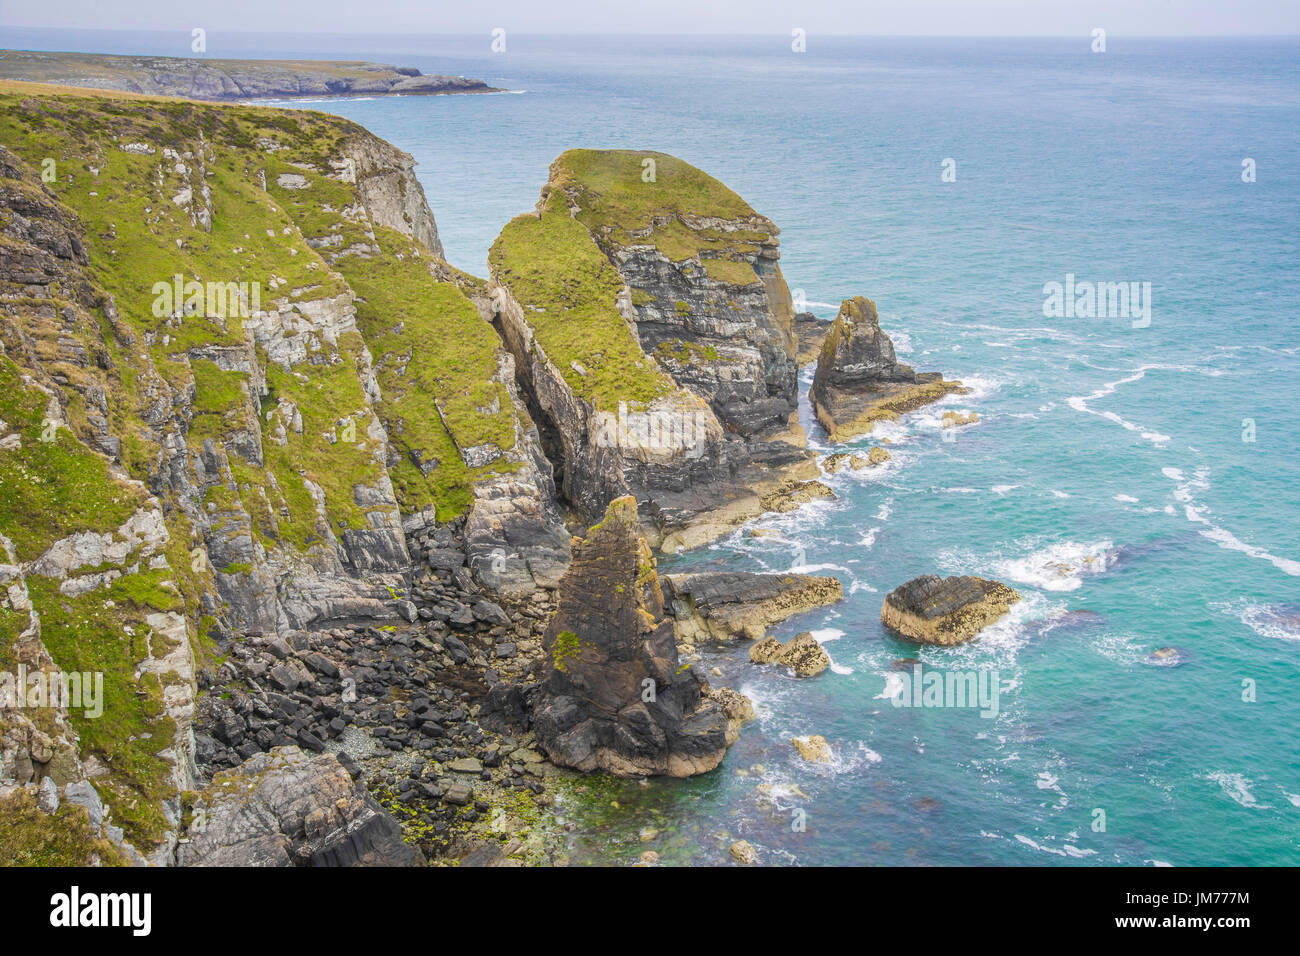 A peaceful and calming coastal landscape view of the ocean and cliff edge of Holyhead, UK. Stock Photo